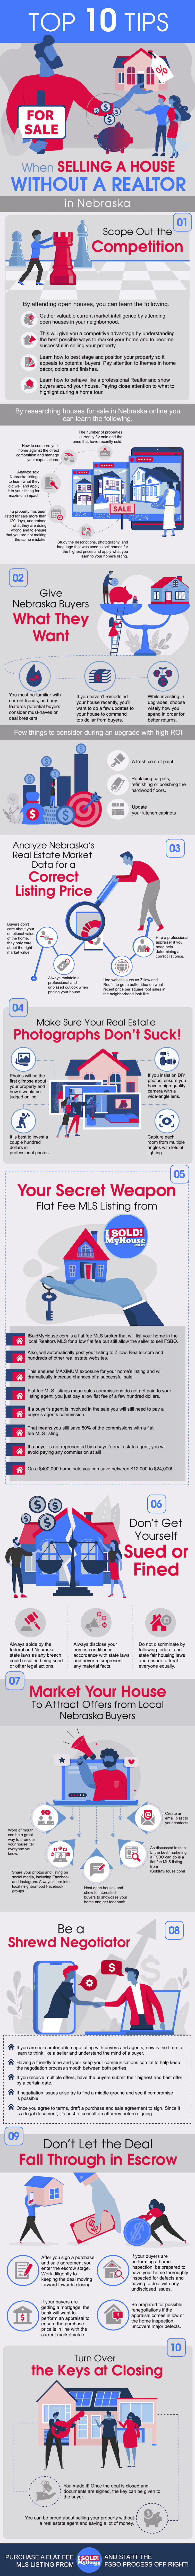 infographic of the 10 steps to sell a house in nebraska without an agent